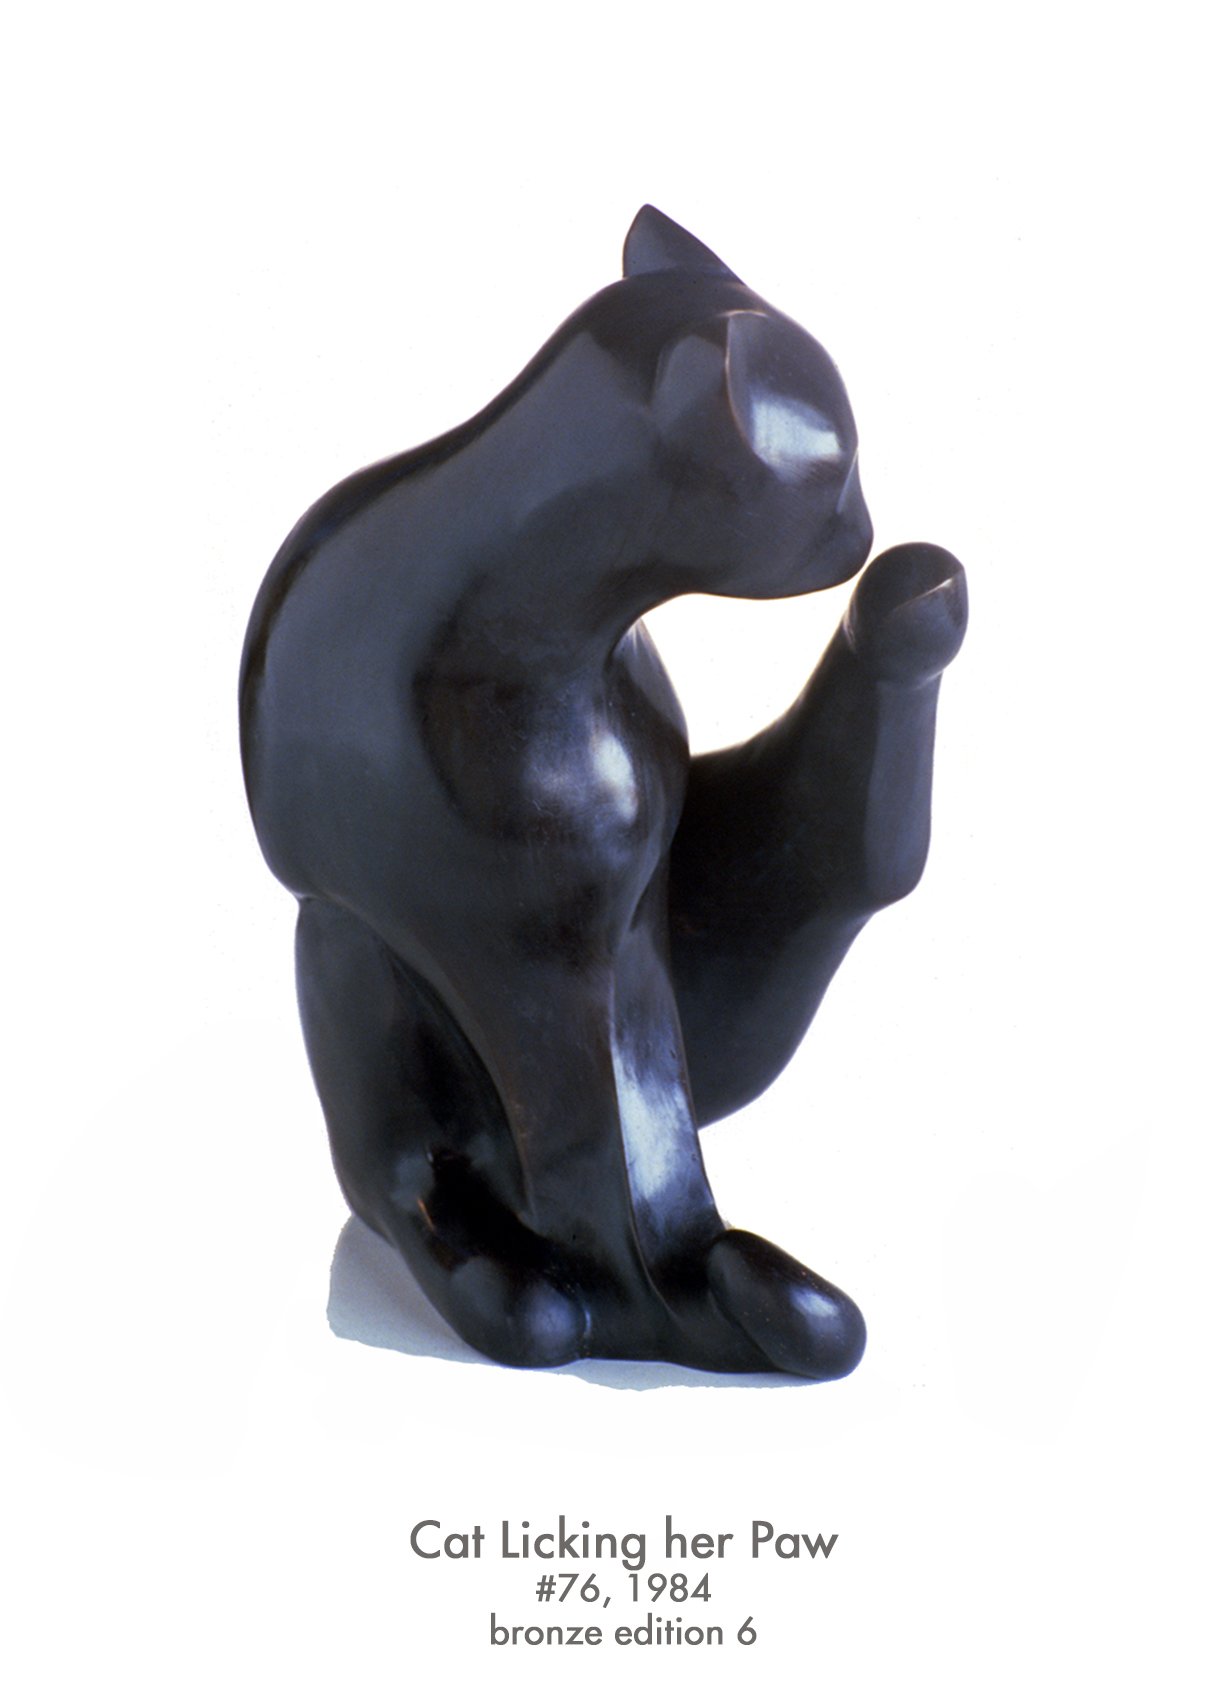 Cat Licking Her Paw, 1984, bronze edition 6, #76 